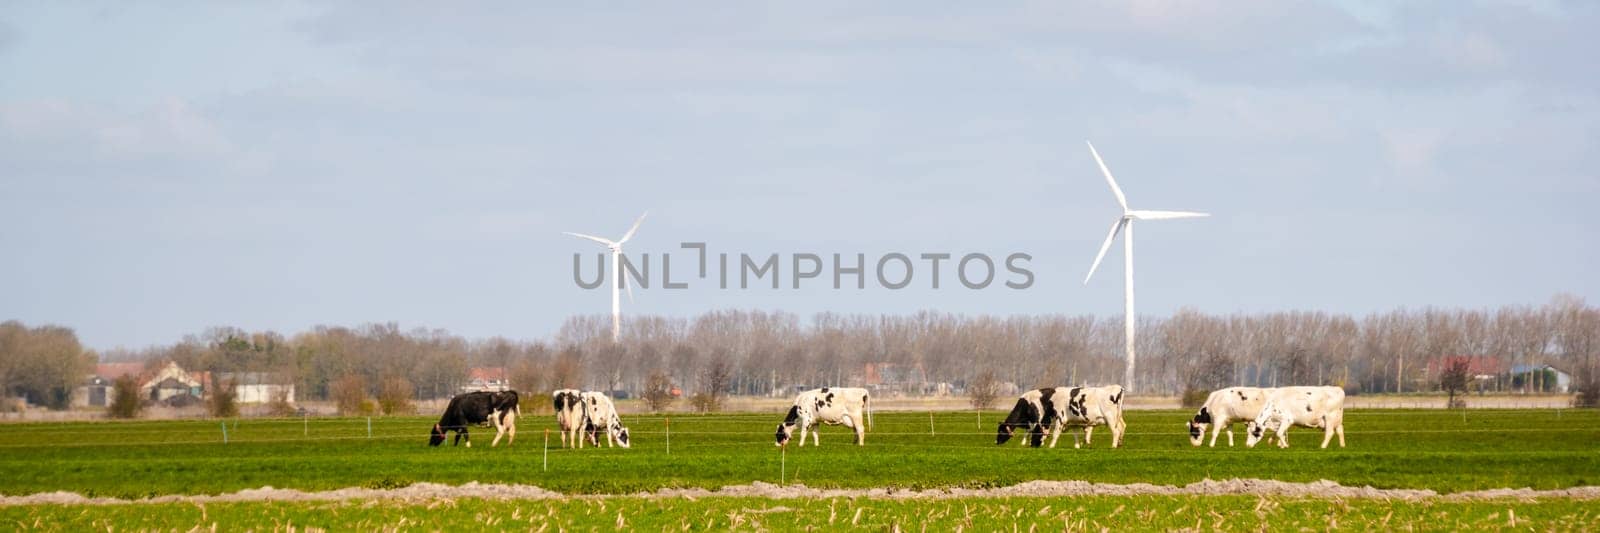 Windmill in a rural area with cows in the field and green grass